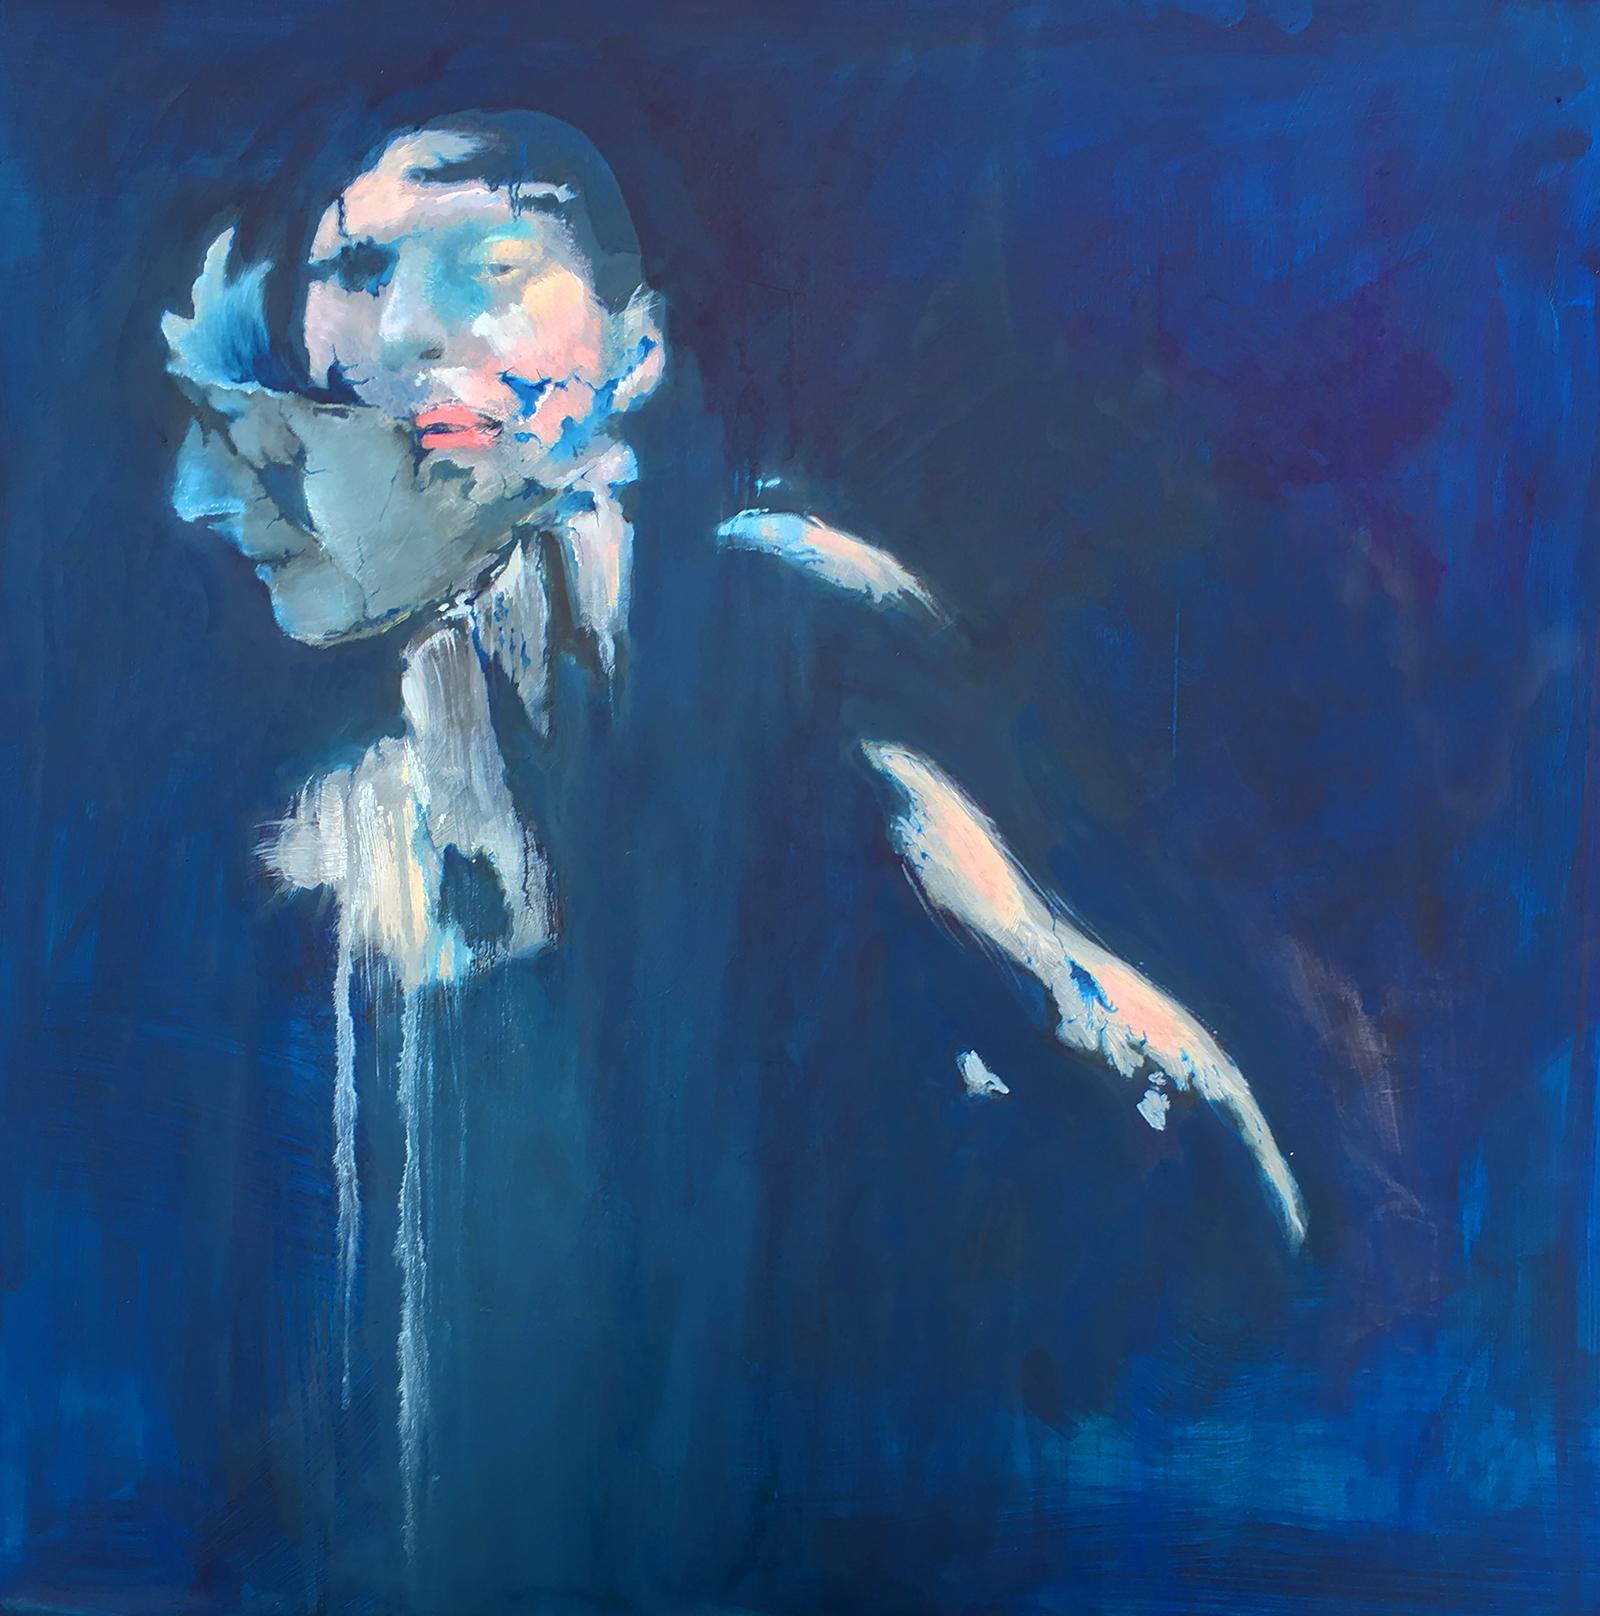 Lannie Hart Portrait Painting - "Woman in Pieces", shows female forms drifting in deep blue